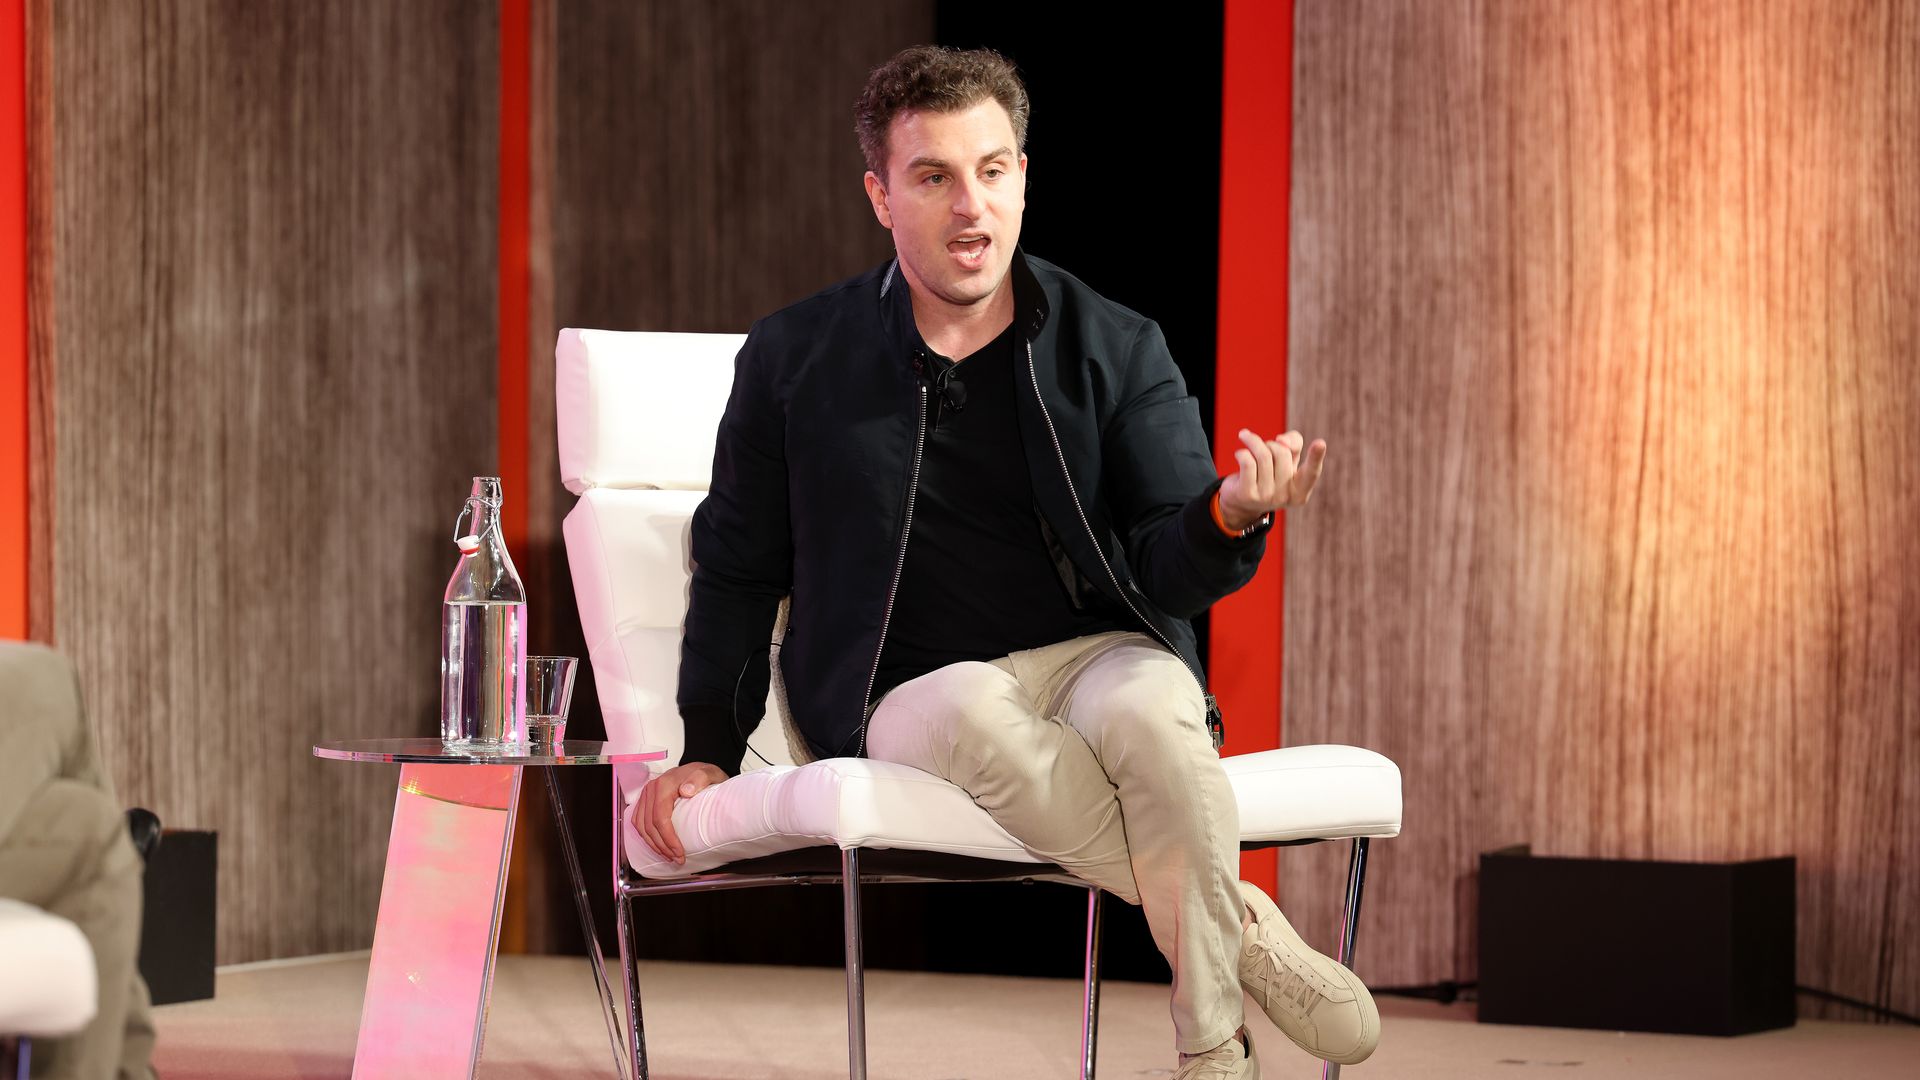 CEO of Airbnb, Brian Chesky speaks on stage during Pivot MIA at 1 Hotel South Beach on February 16, 2022 in Miami, Florida. 